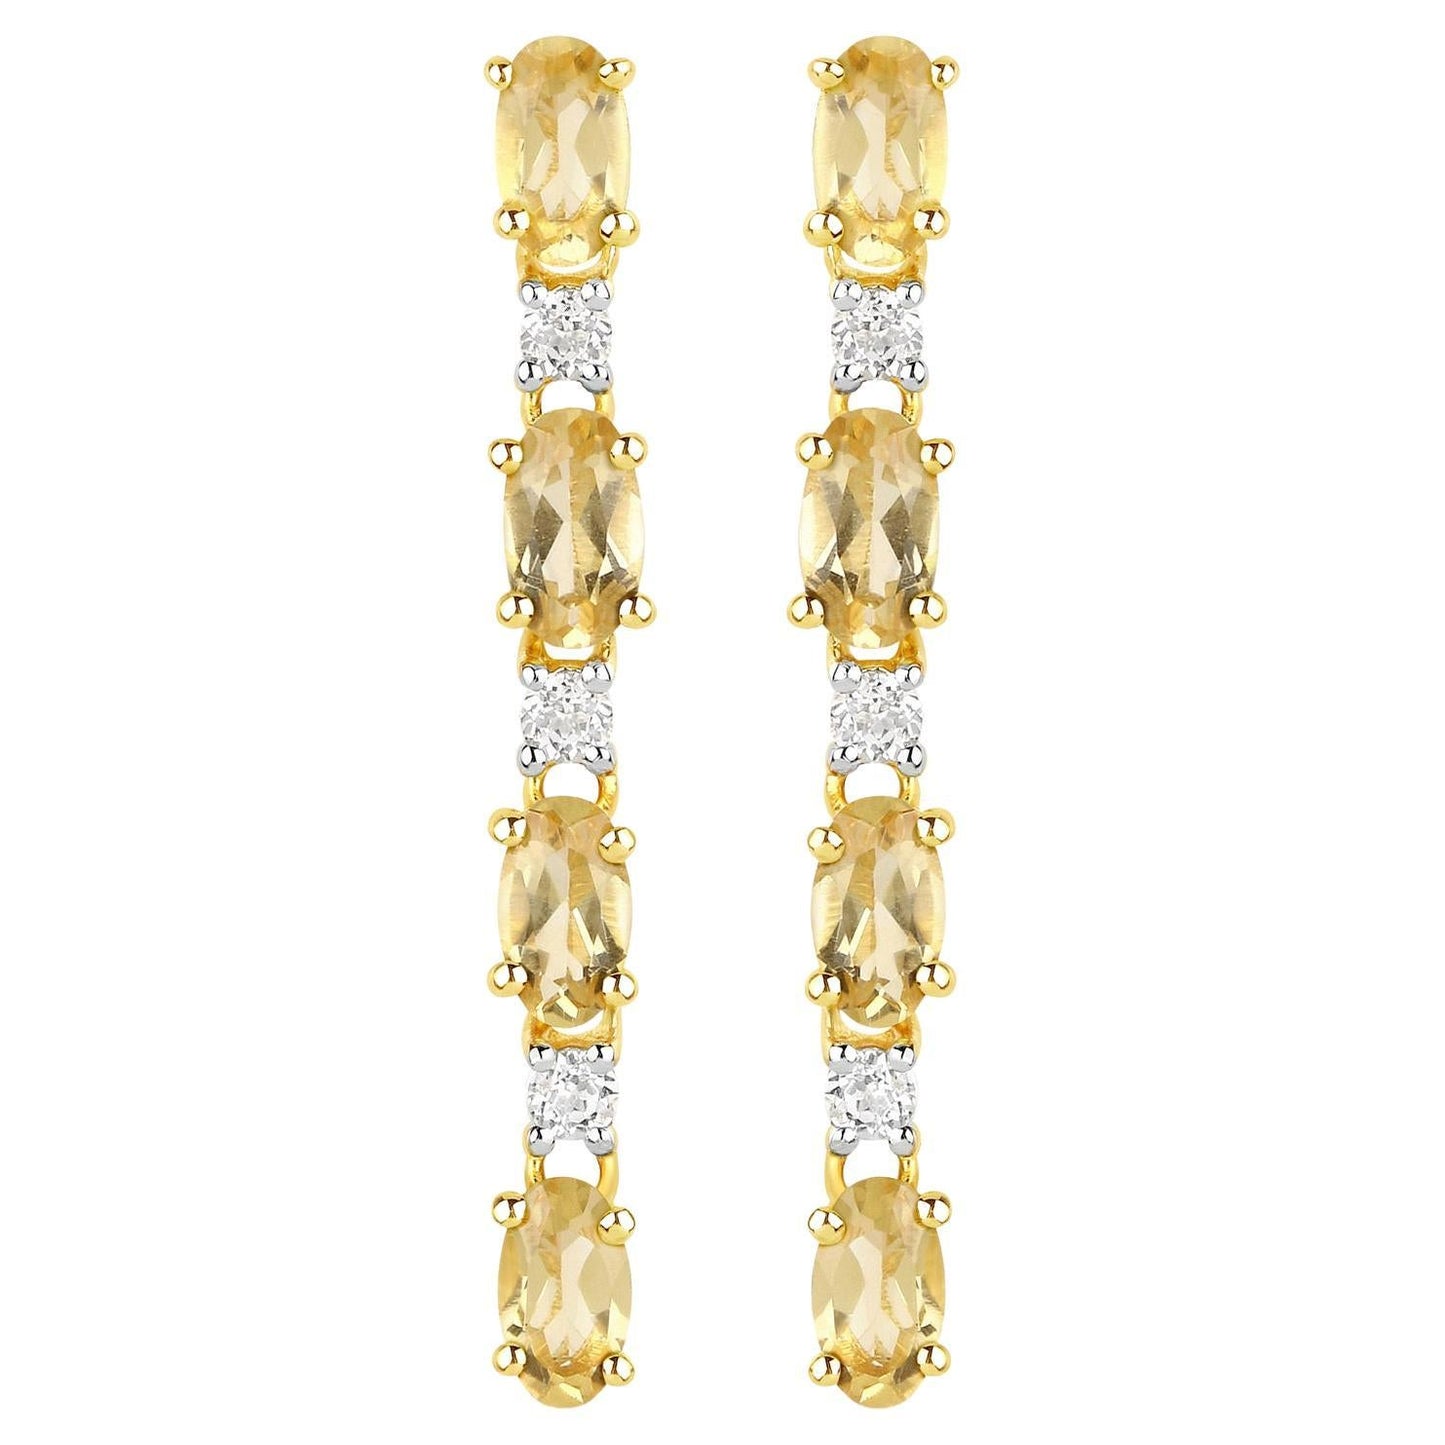 Natural Citrine and White Topaz Dangle Earrings 1.84 Carats Total